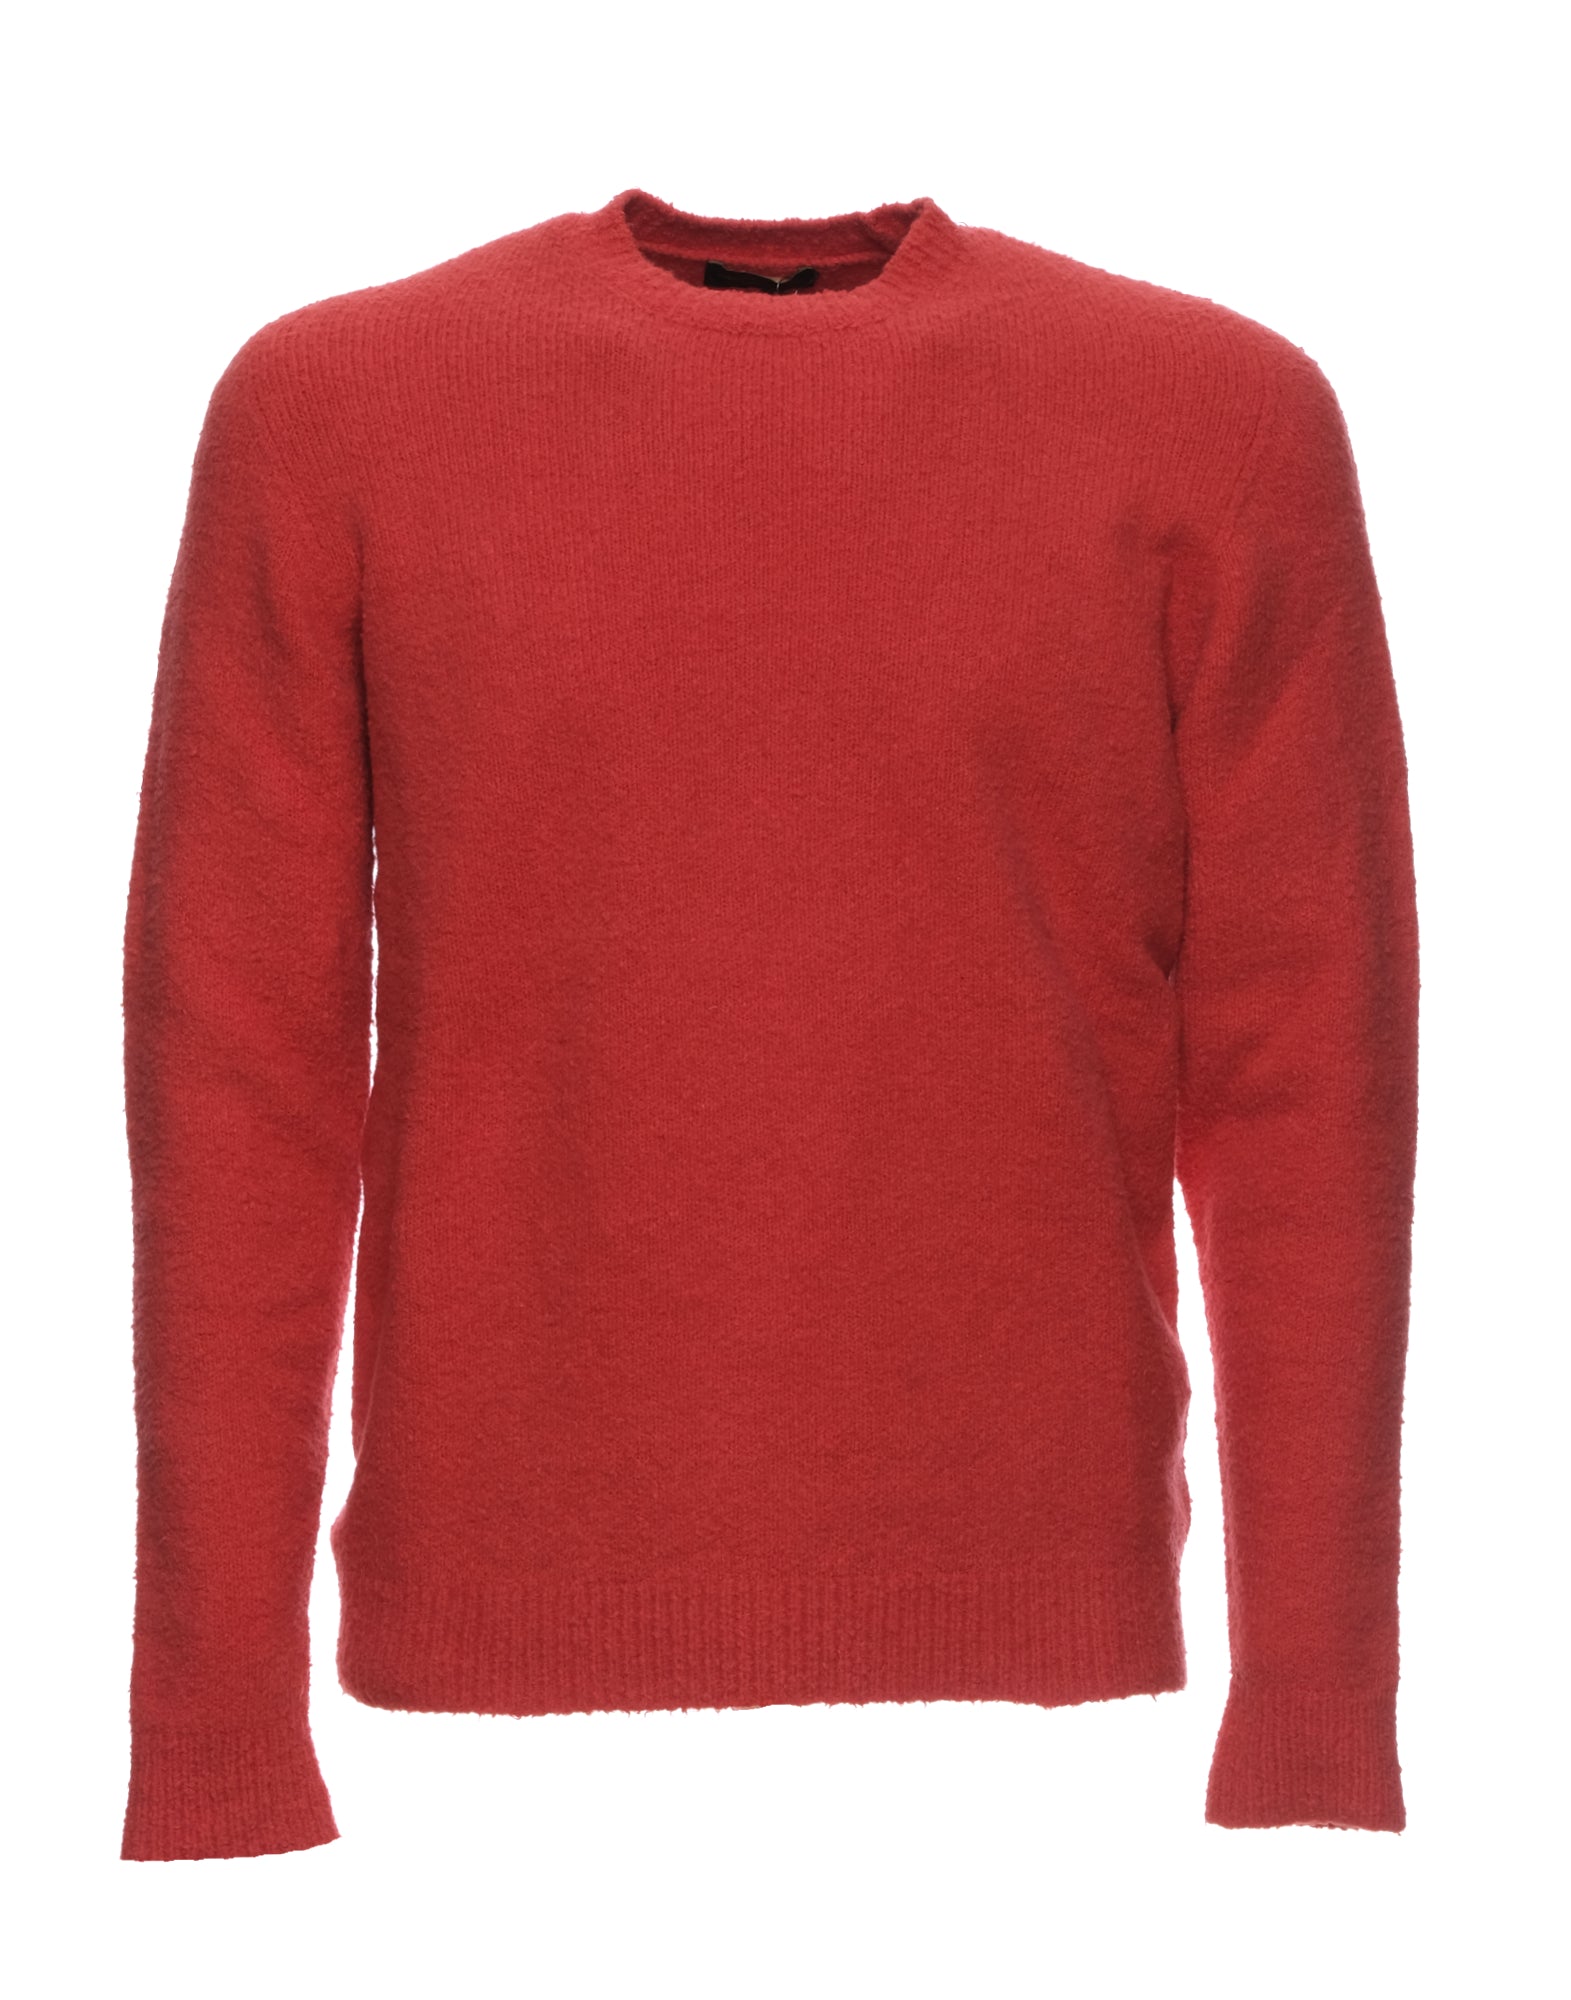 Pull pour homme RM45001 41 ROBERTO COLLINA